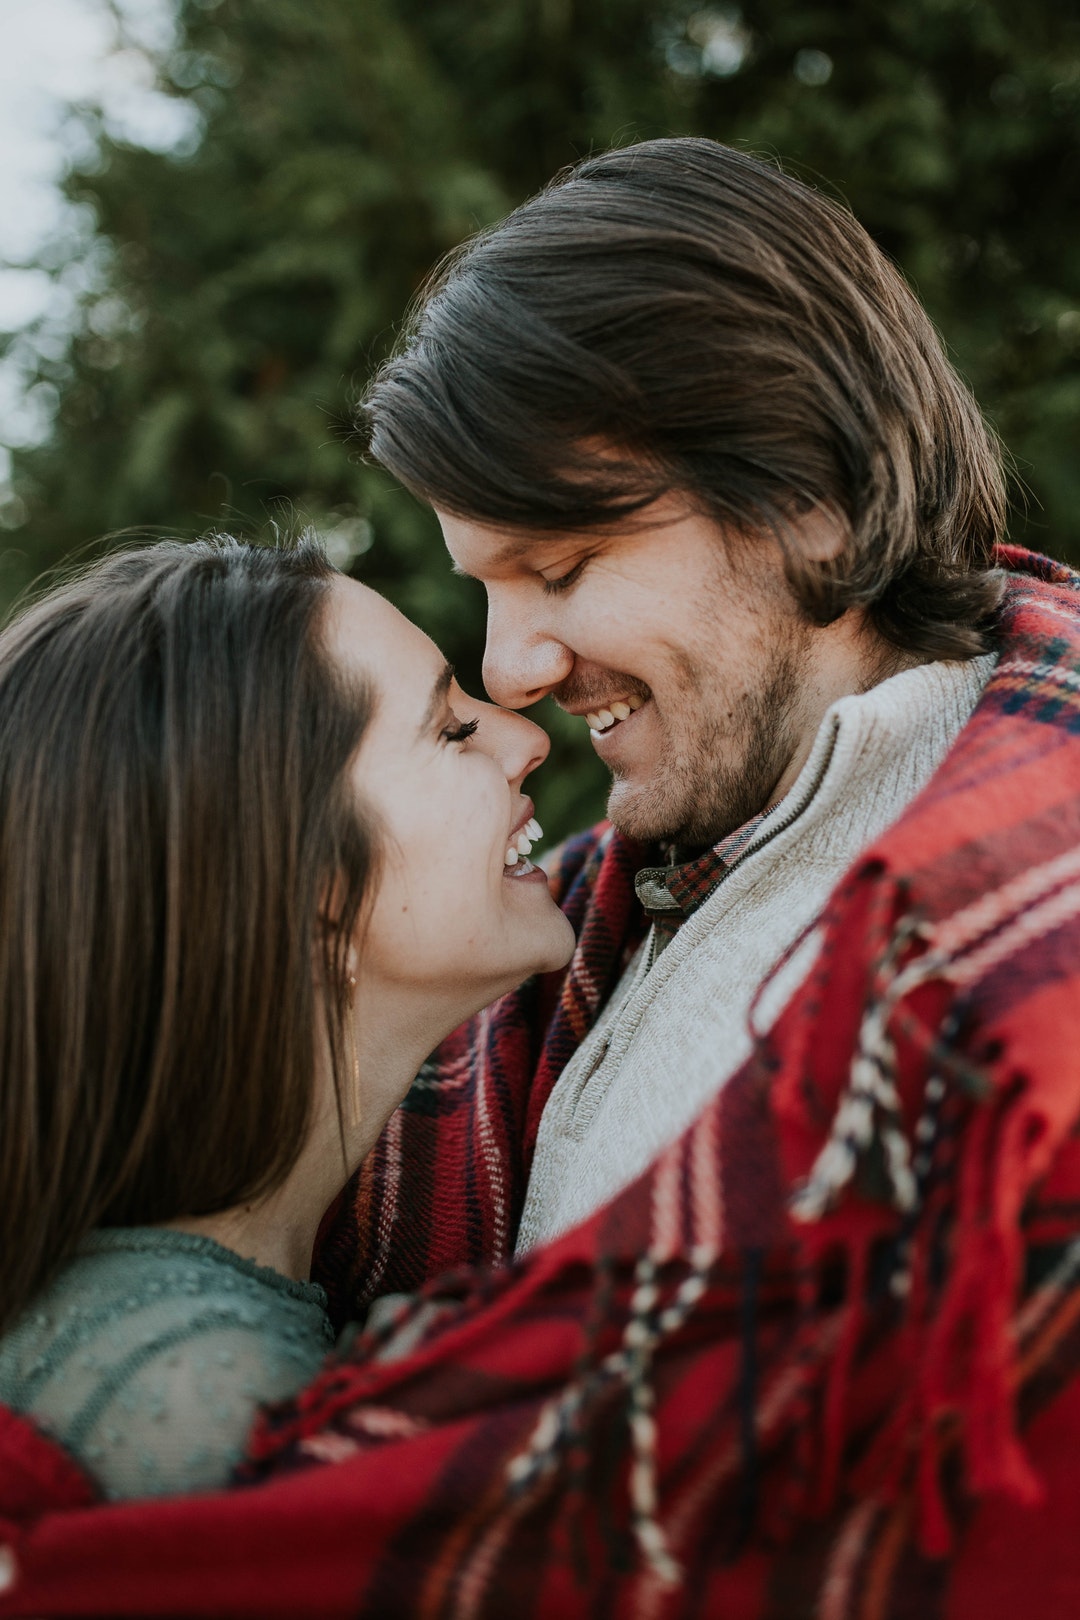 Man and woman wrapped together in a red plaid blanket outdoors